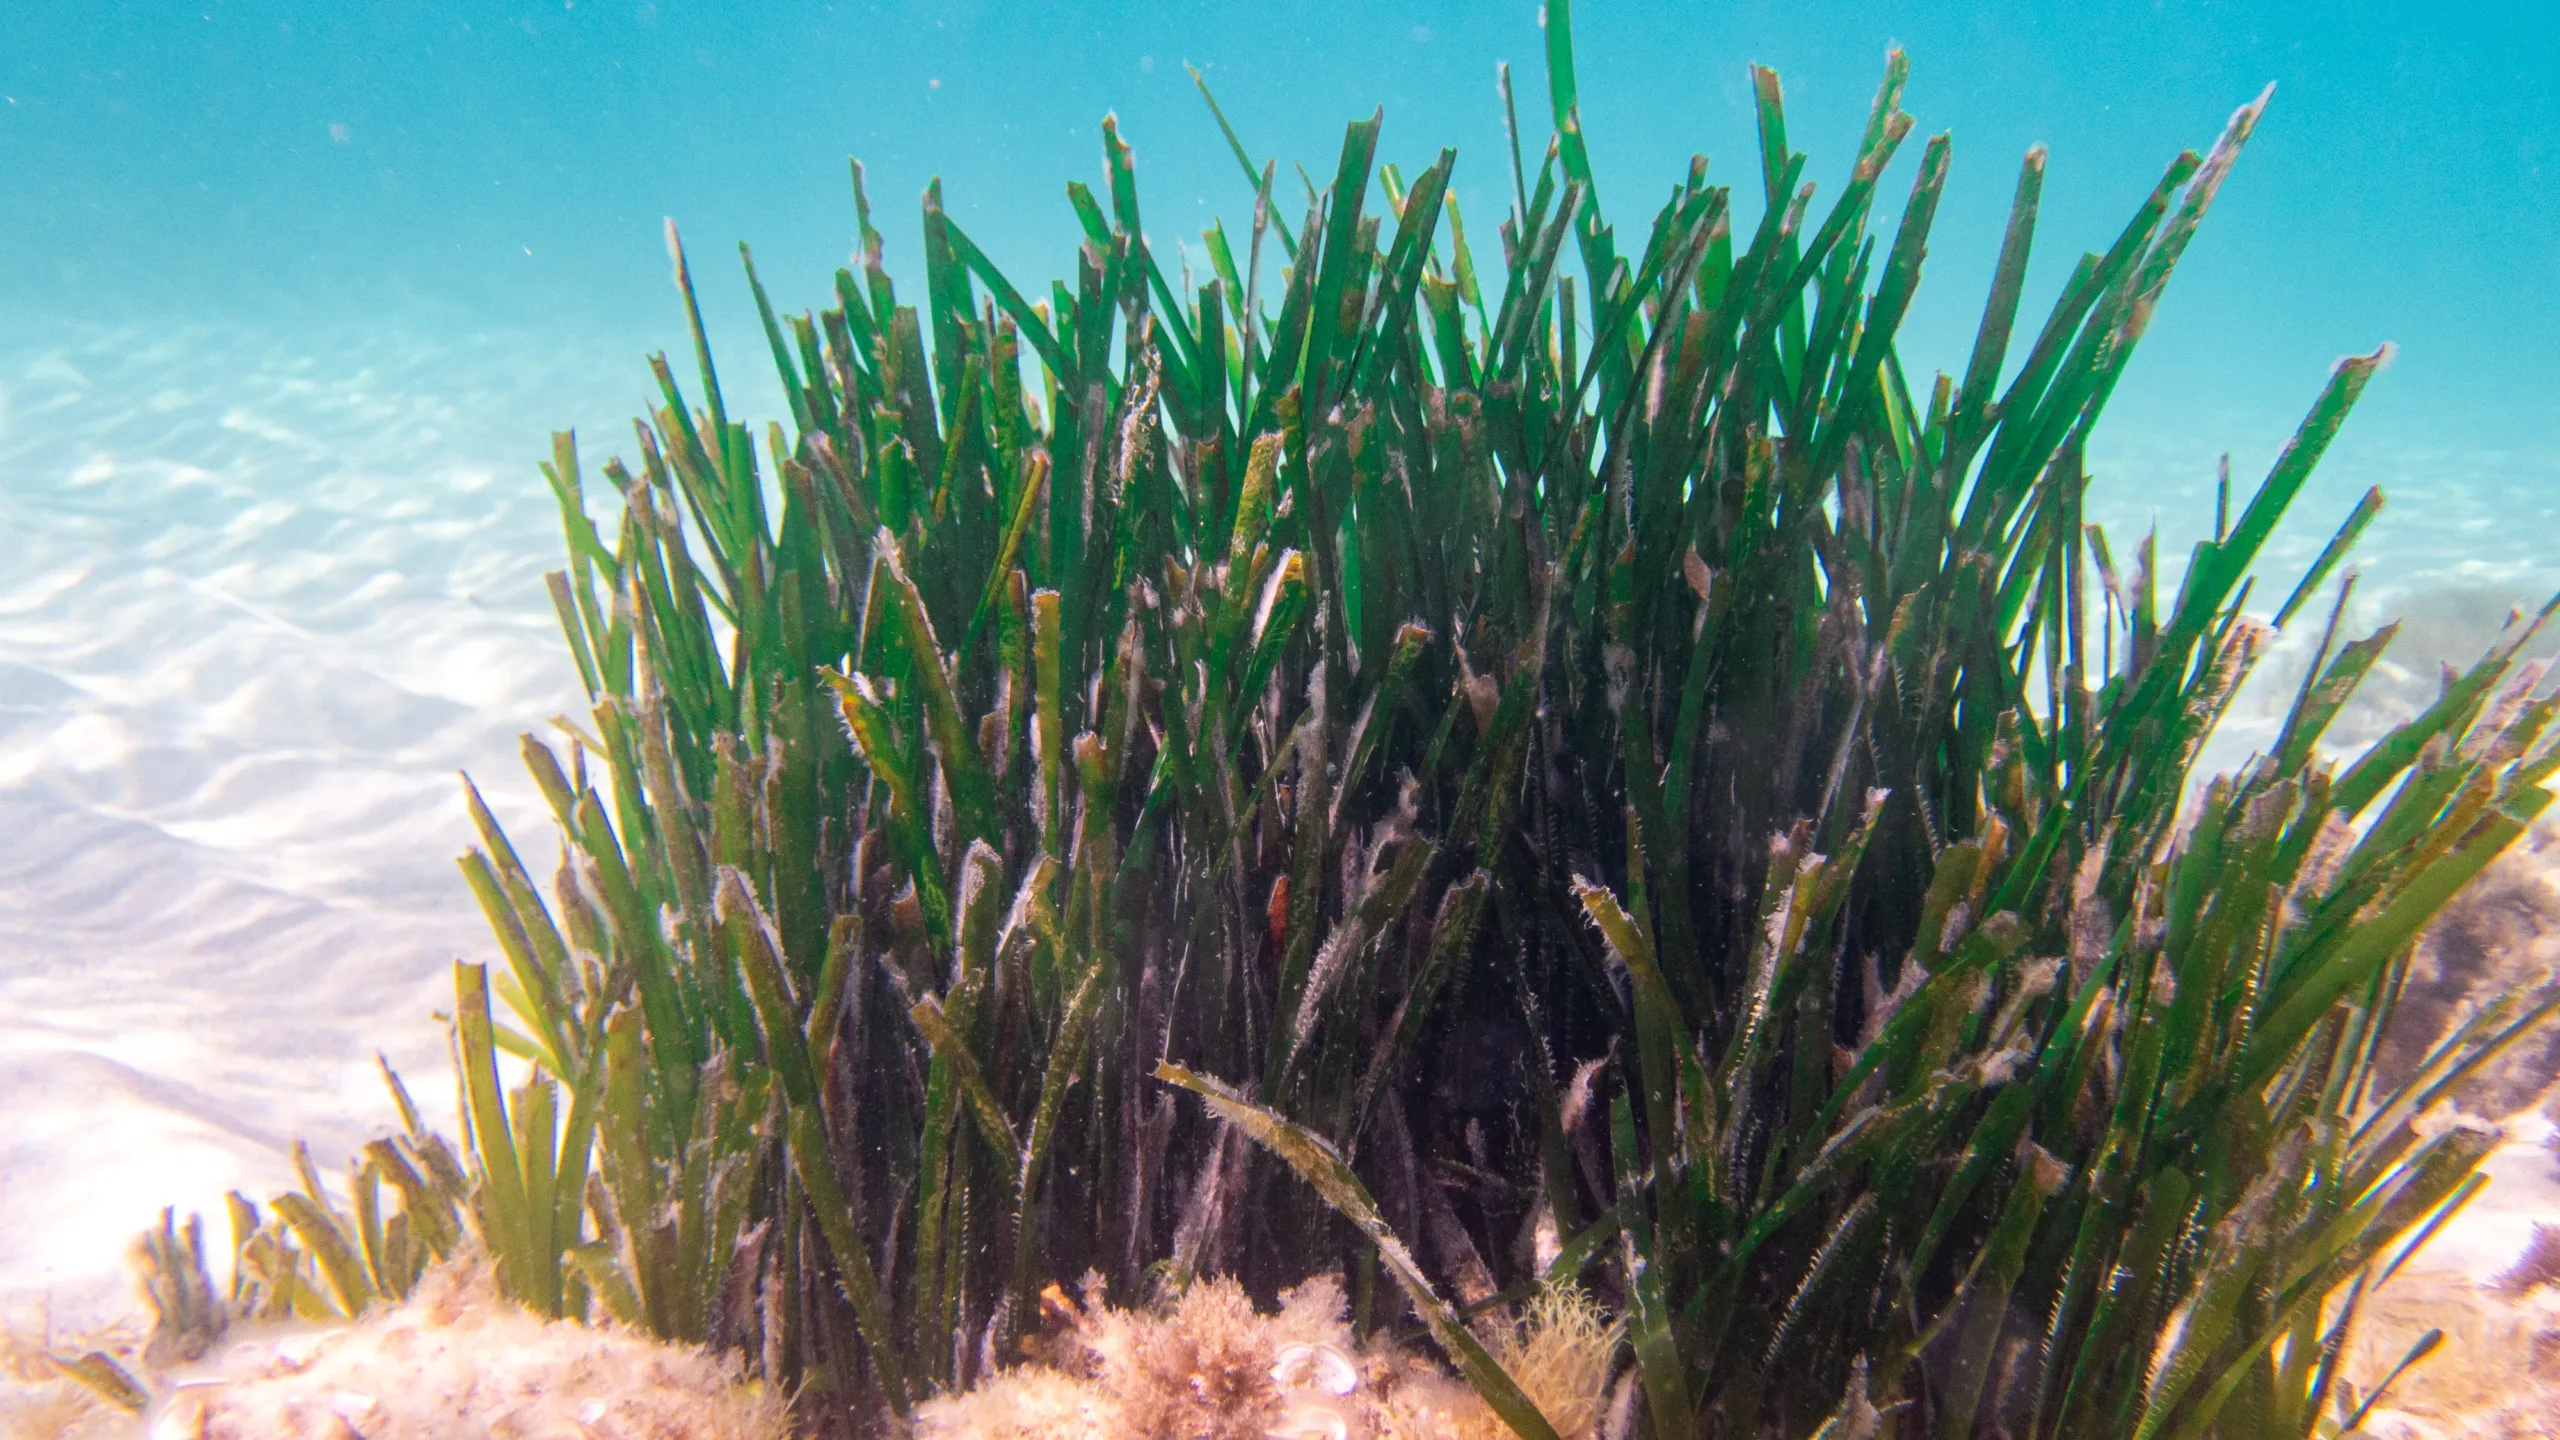 A picture of Posidonia Oceanica plant in the Tunisian Kuriat islands in a shallow water .